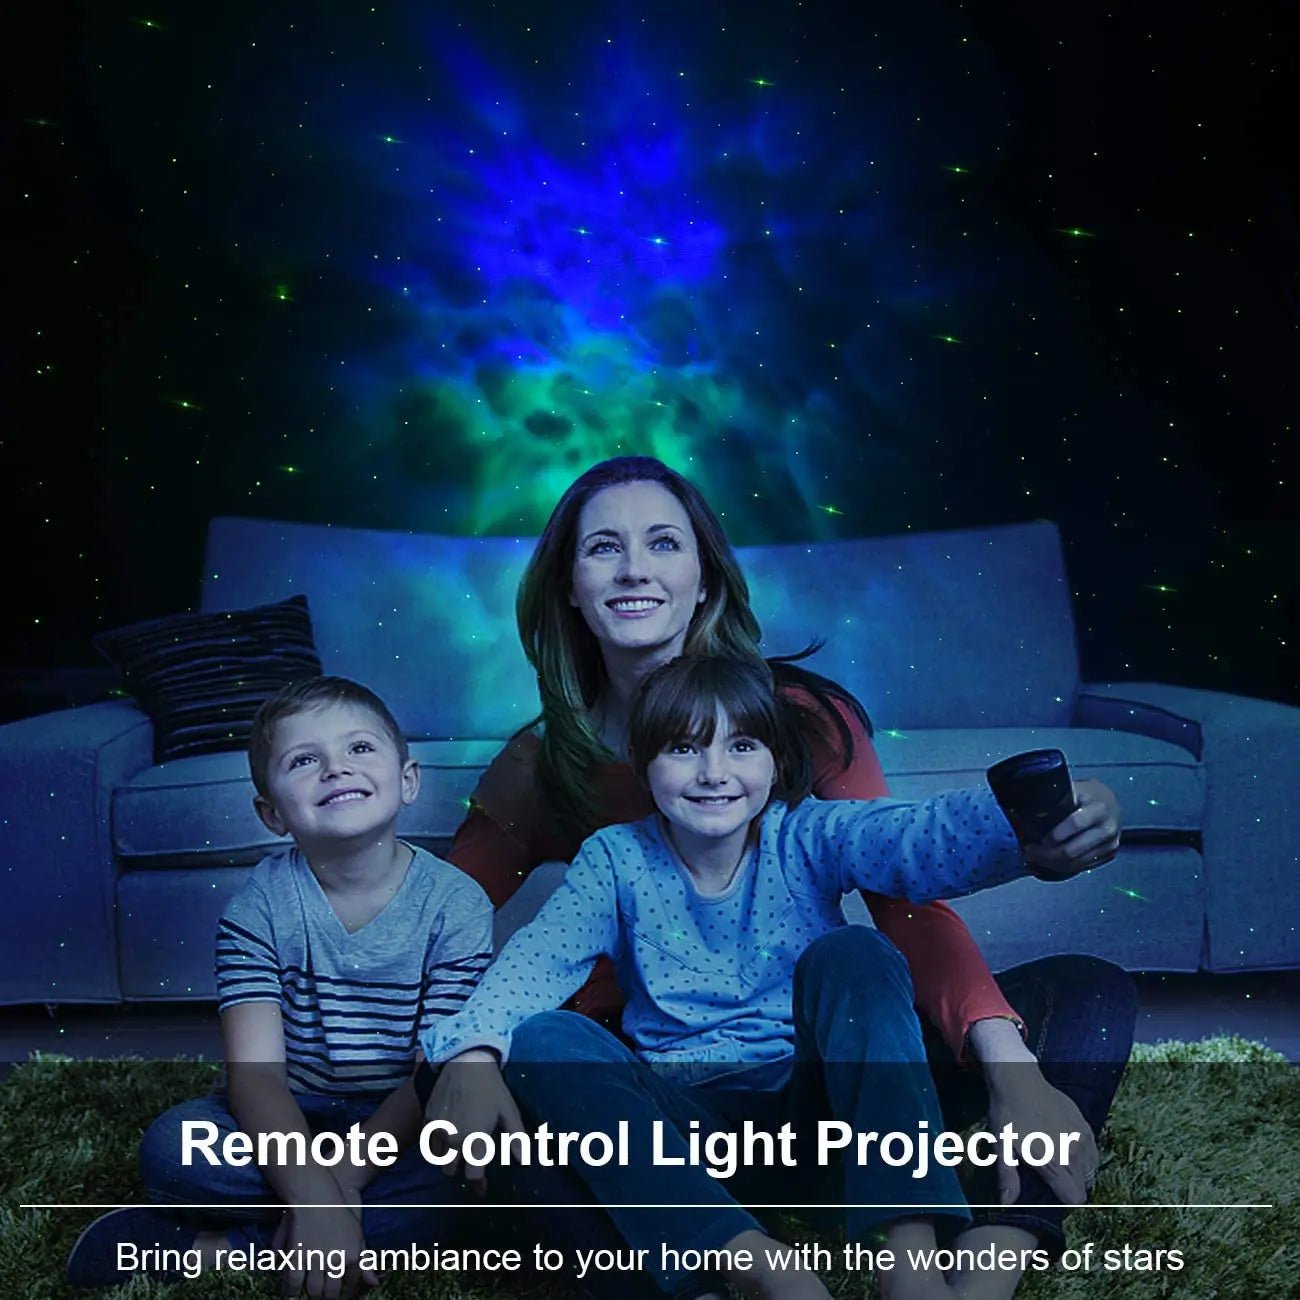 Star Projector Laser Projection 7-color Rotating Nightlight - The Rave Cave